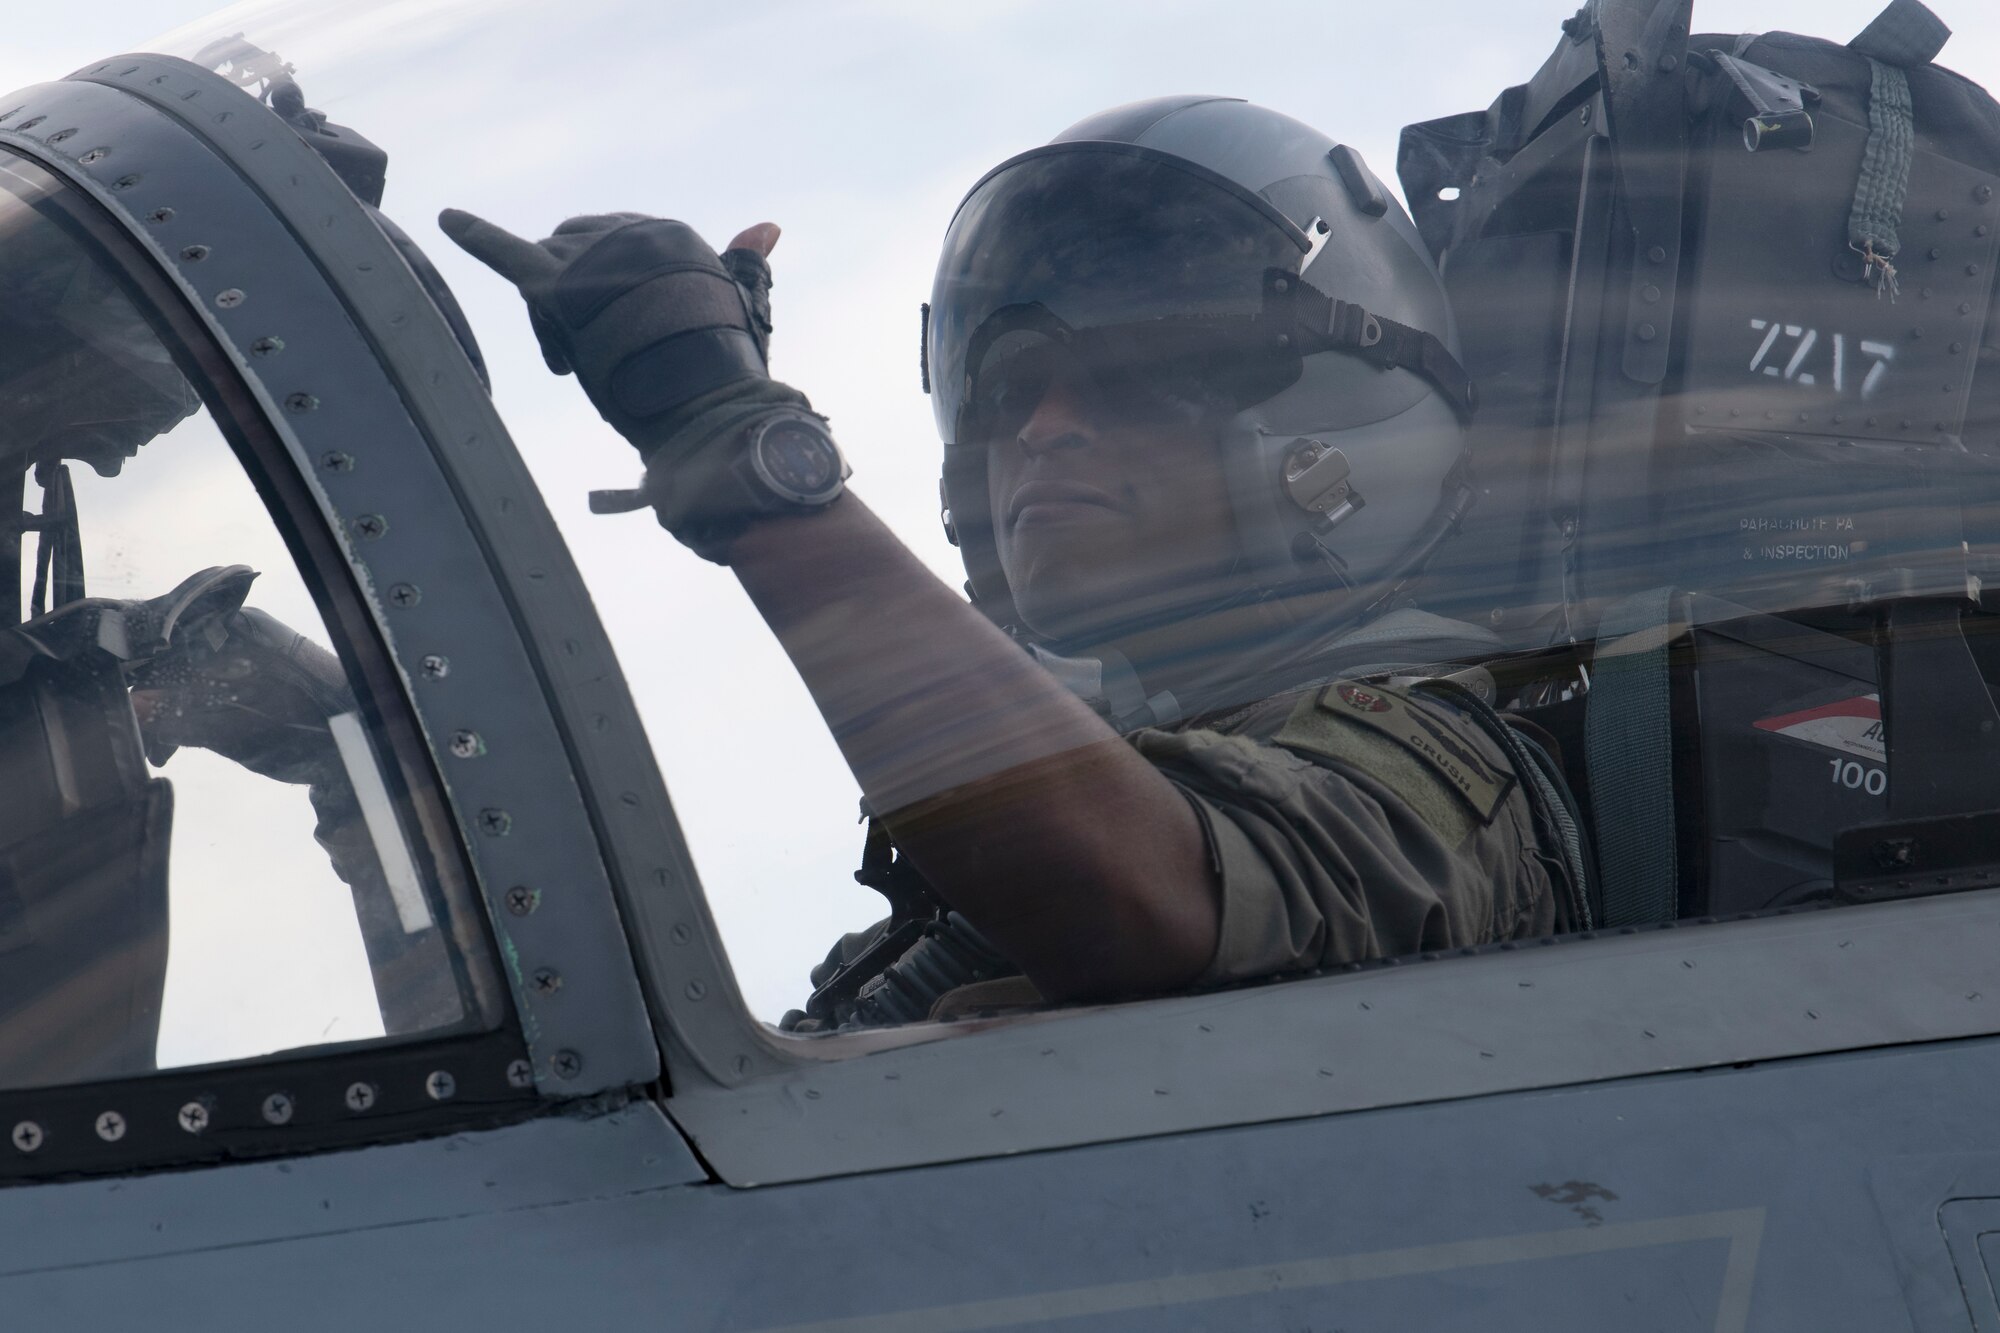 An F-15C Eagle pilot assigned to the 44th Fighter Squadron sits in the cockpit while receiving hot-pit refueling during surge operations at Kadena Air Base, Japan, Aug. 24, 2022. During a hot-pit refuel, the pilot remains in the cockpit with engines running while maintenance crews perform safety checks and refuel the aircraft, cutting the time between sorties to less than 30 minutes. (U.S. Air Force photo by Senior Airman Jessi Roth)